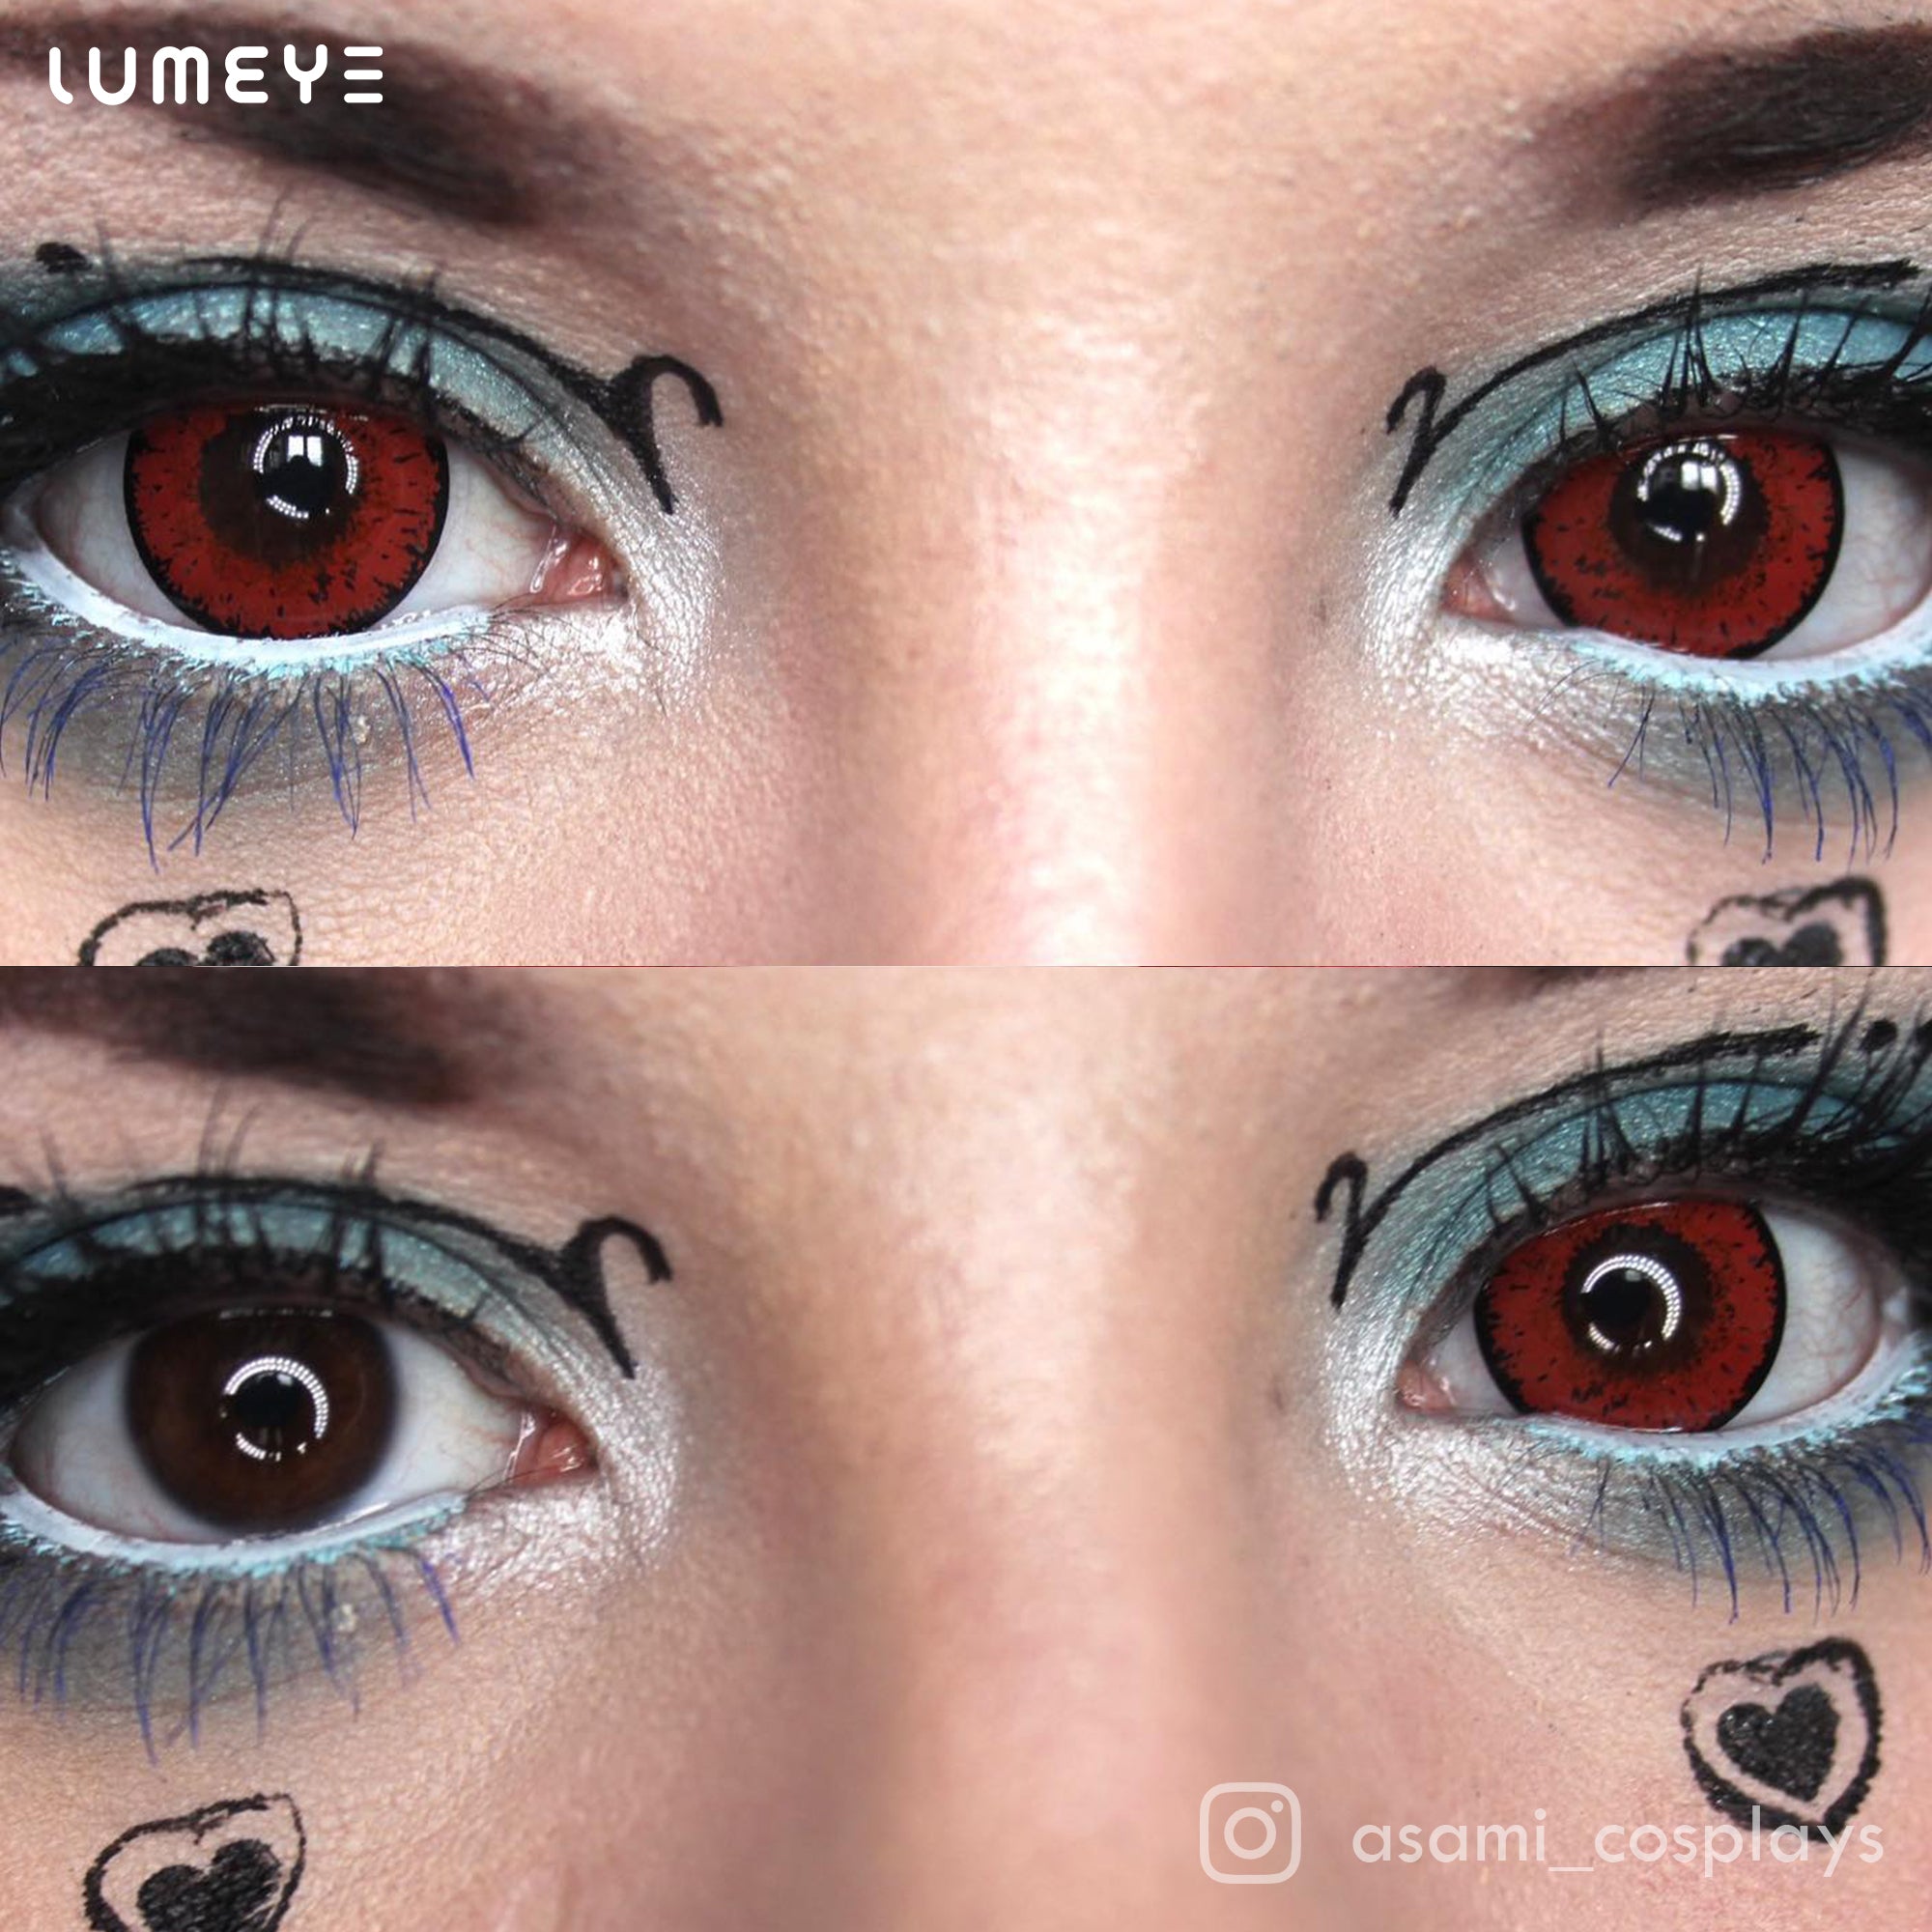 Best COLORED CONTACTS - LUMEYE Candy Wine Red Colored Contact Lenses - LUMEYE